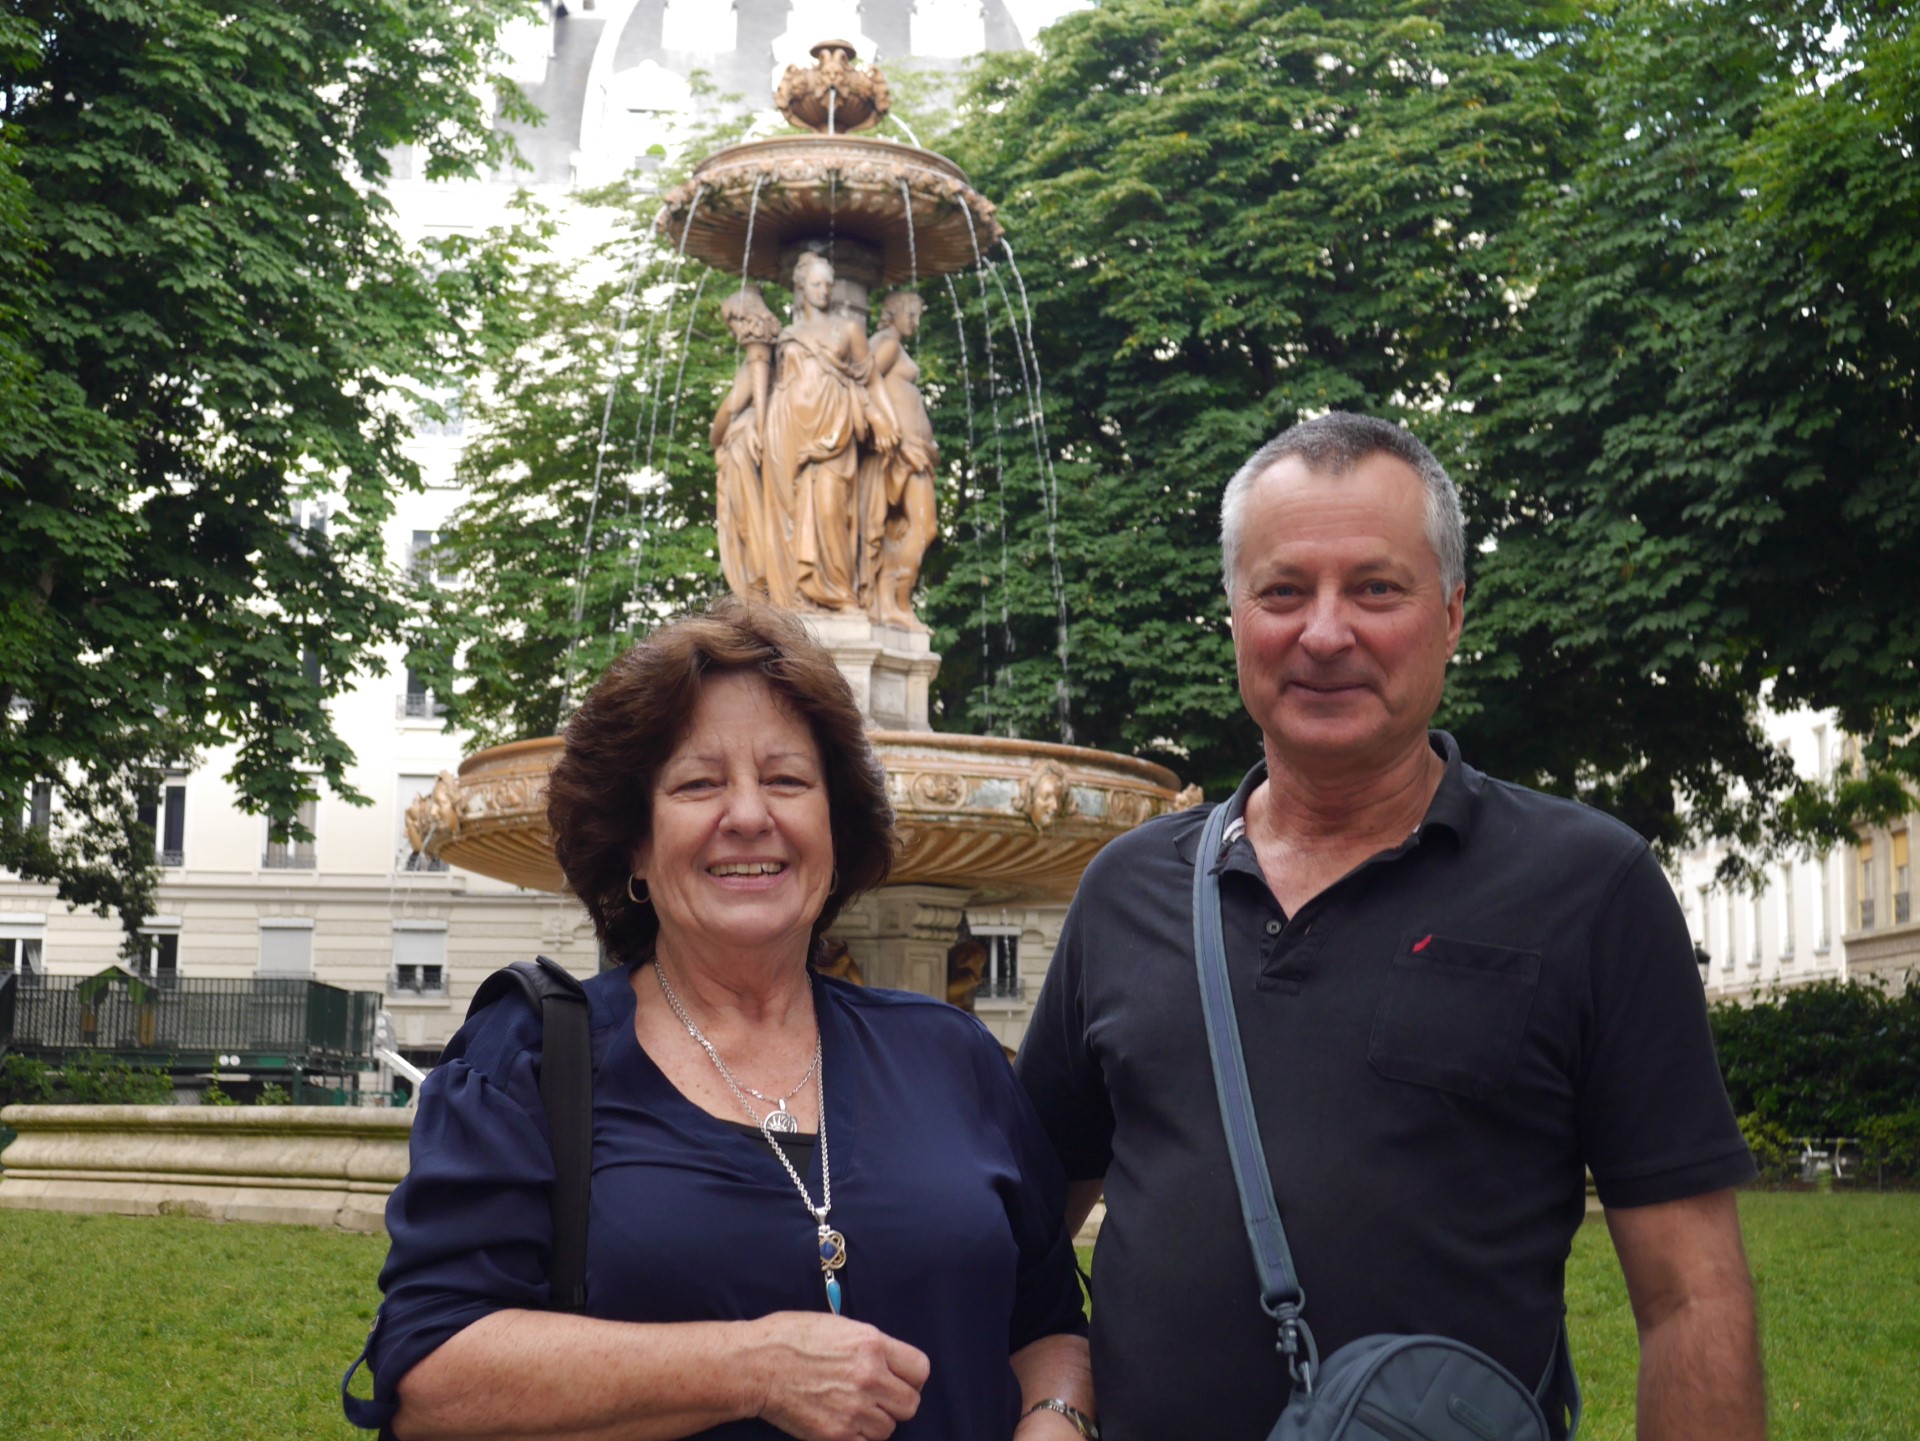 A man stands with his arm around a woman in a park in front of a fountain. They're both smiling.